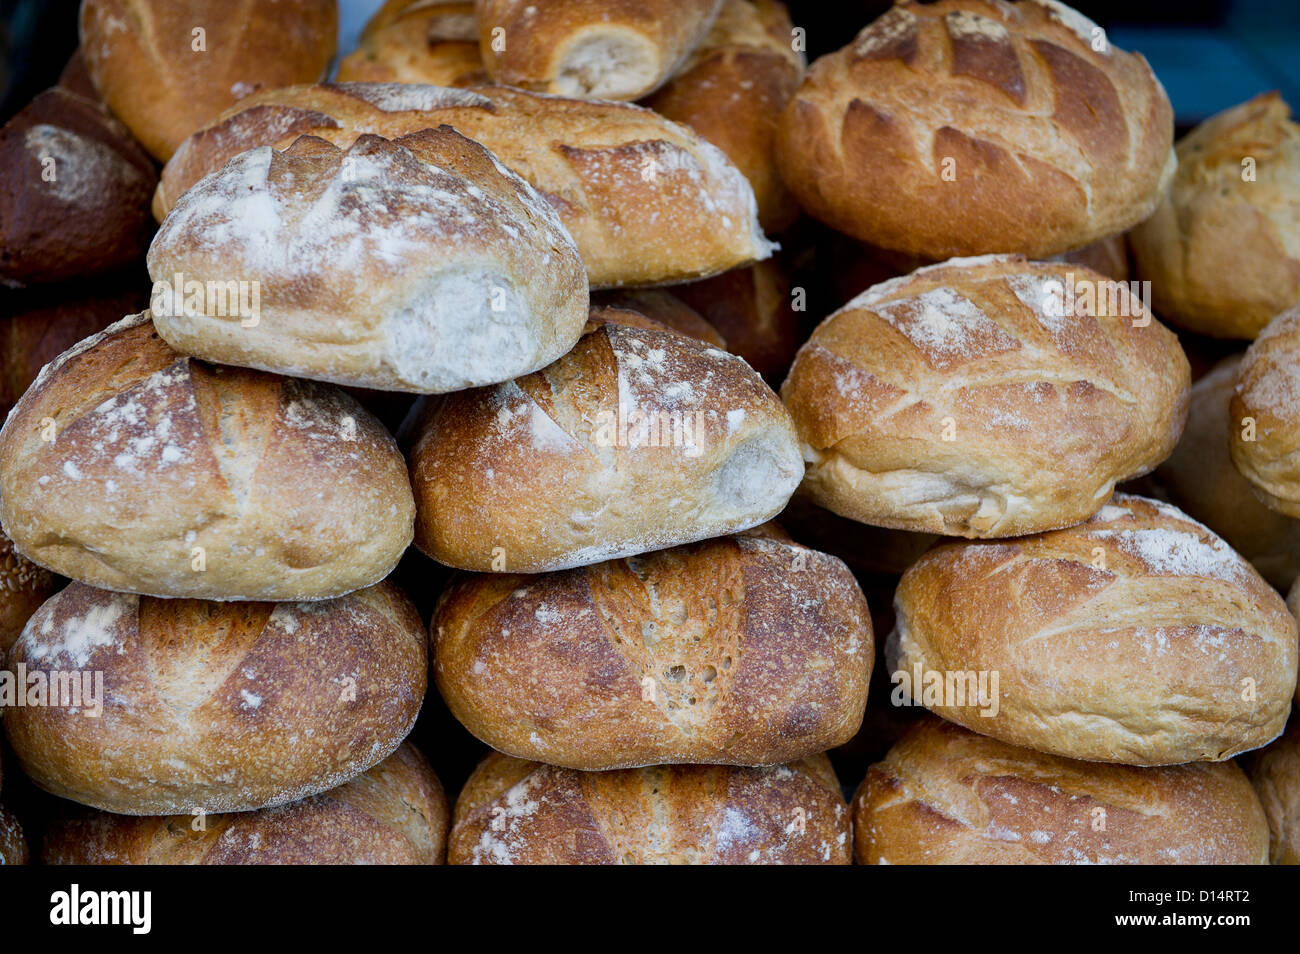 Loaves of bread. Stock Photo